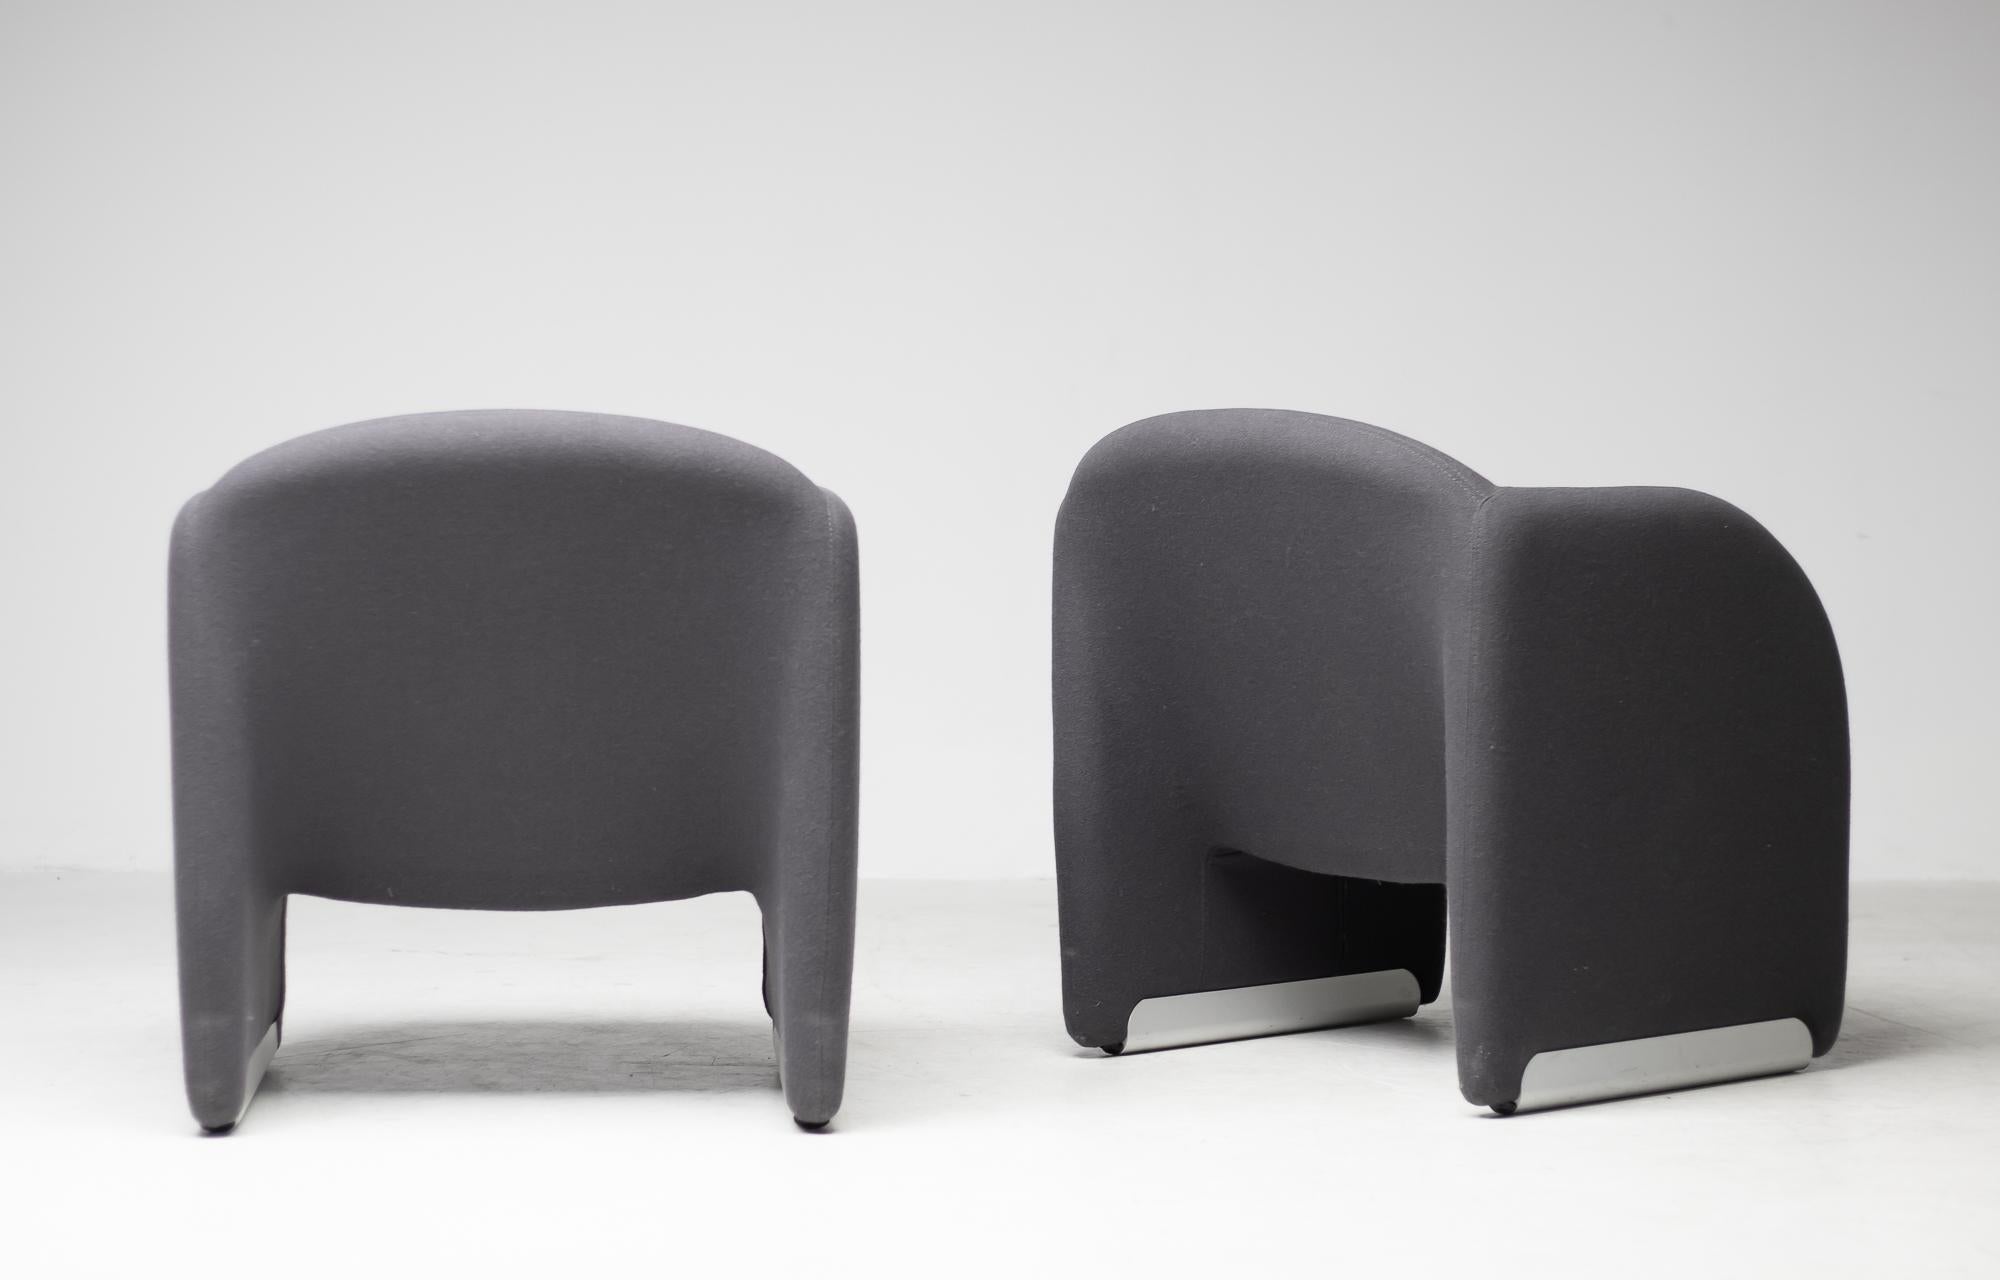 Pair of Ben armchairs in dark grey Kvadrat Tonus wool on aluminum base.
Marked with label on the inside of the base.
Priced as a set.